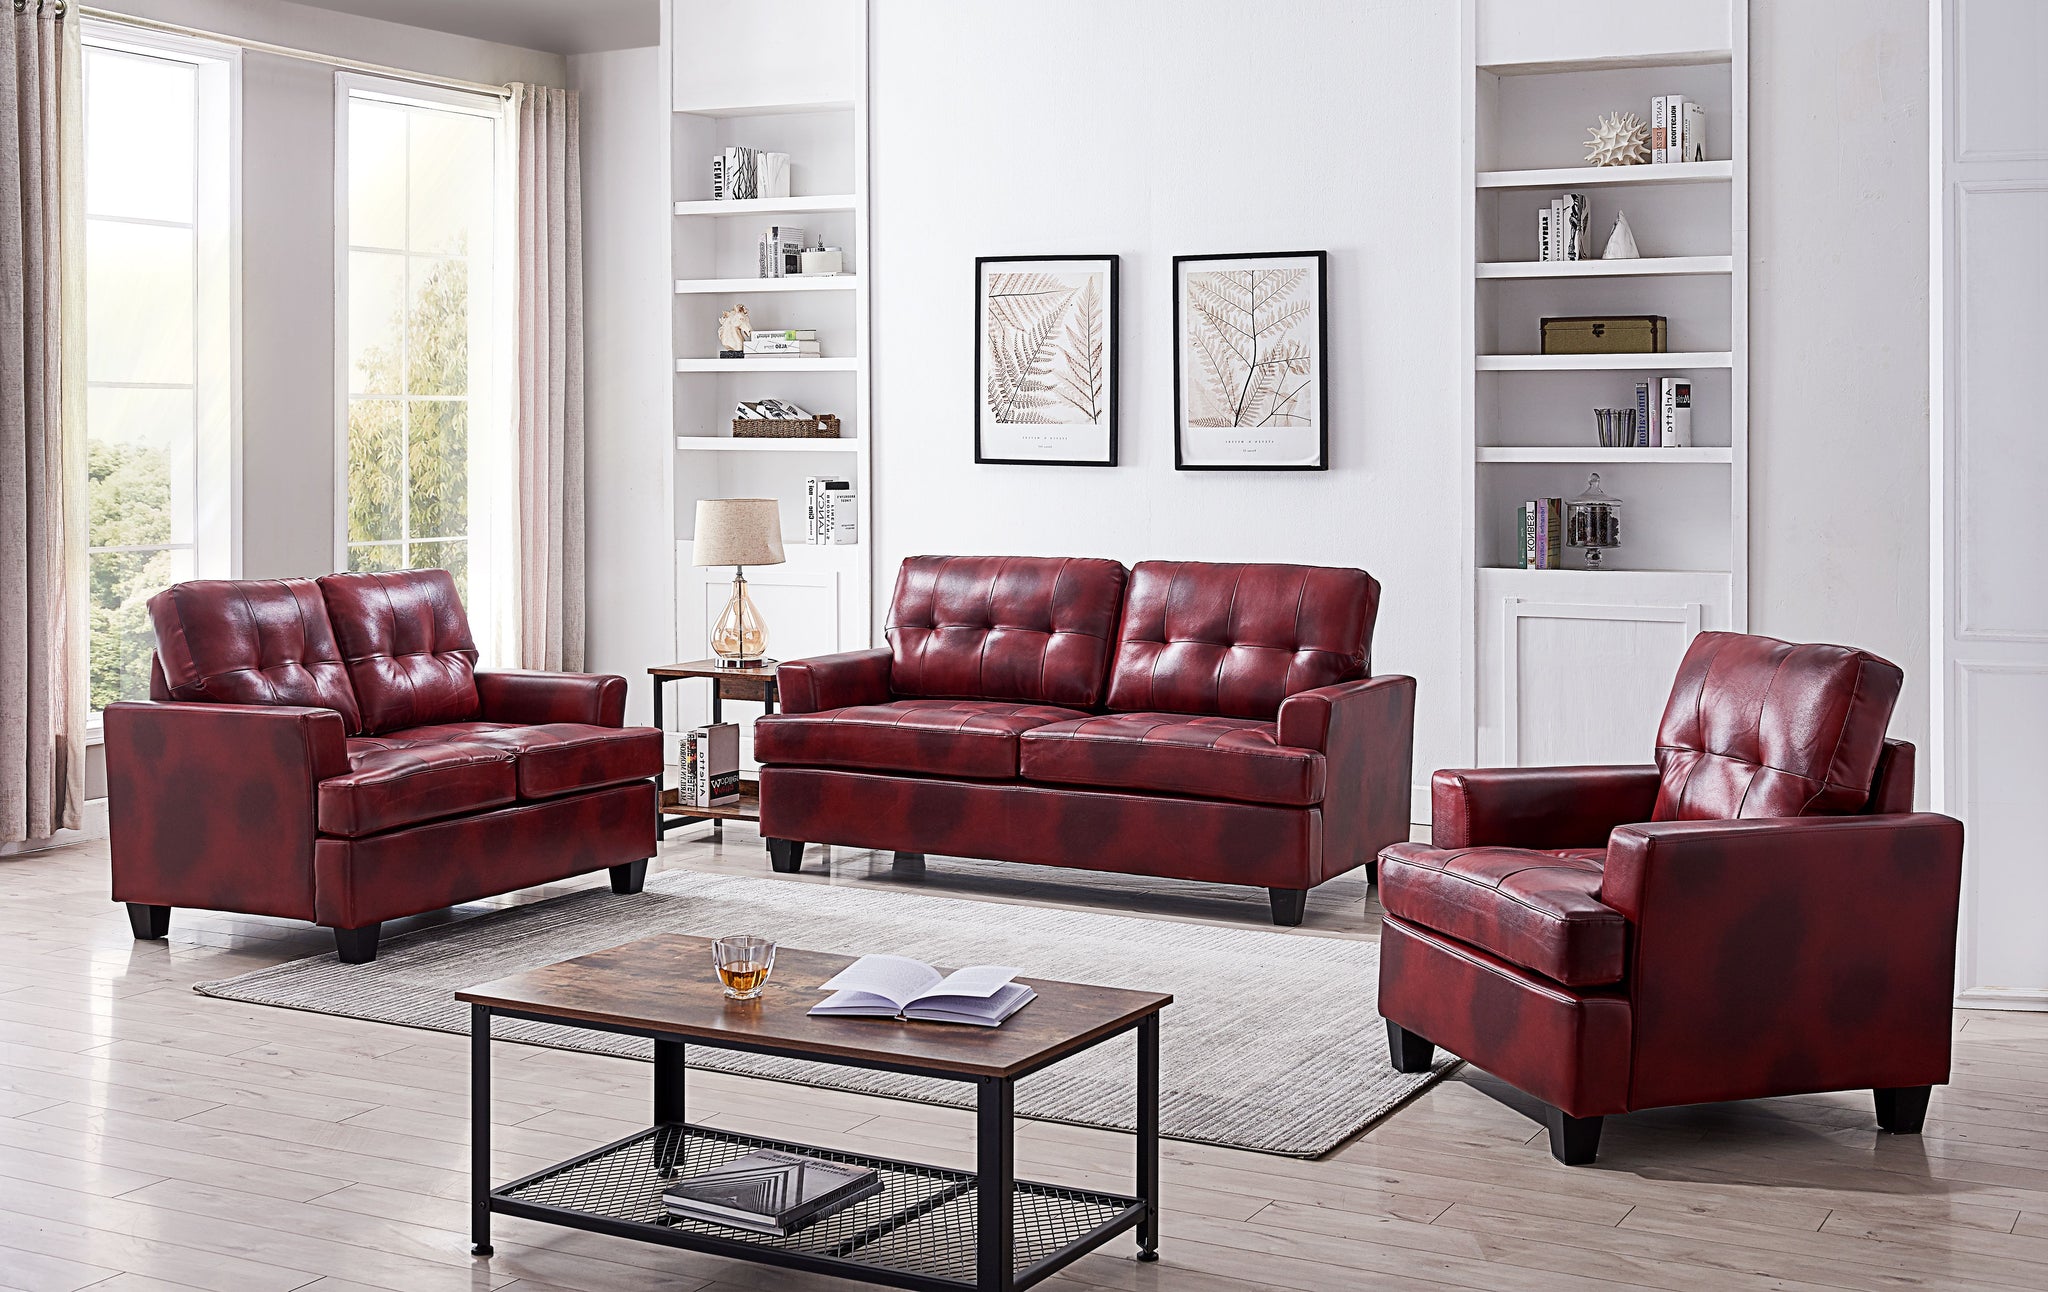 Molina 3 Piece Transitional Living Room Set Red Upholstered Faux Leather Chair Loveseat Sofa Pilaster Designs